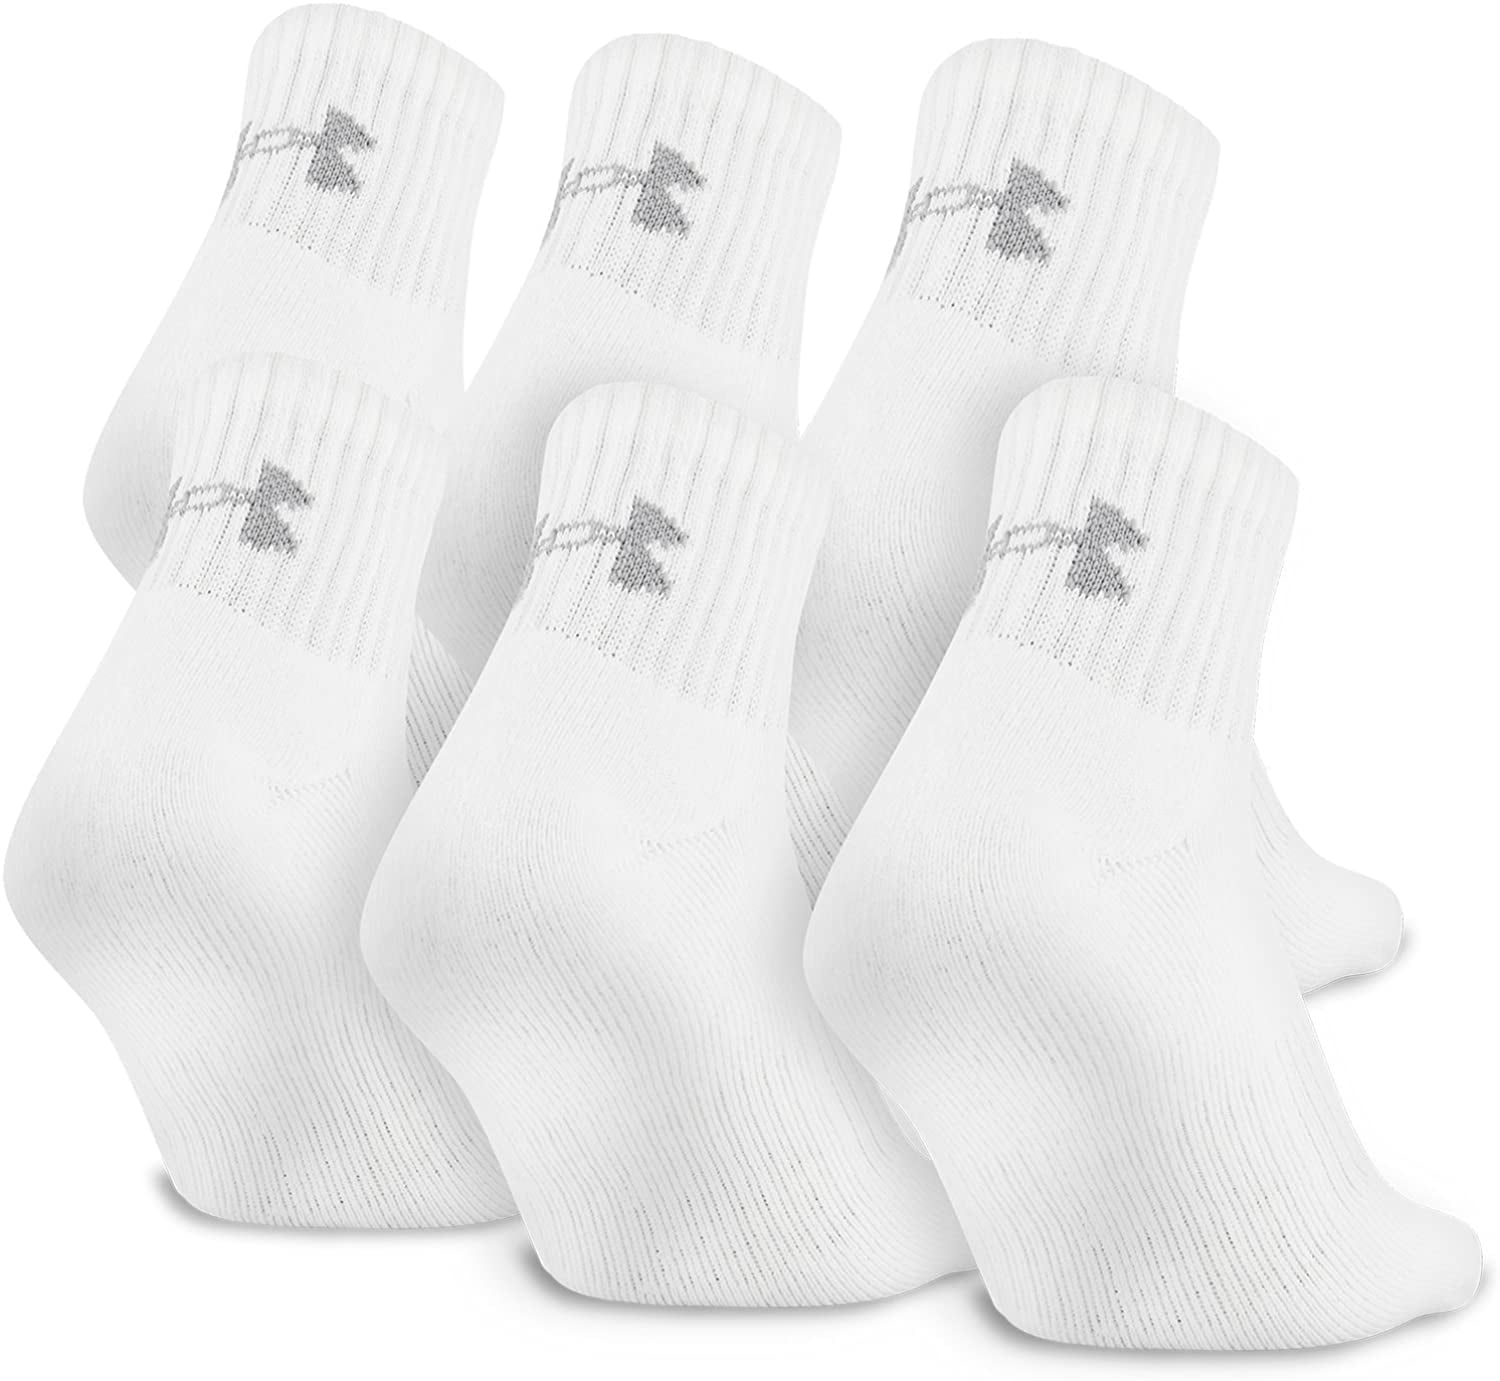 Youth 13.5k-4Y NEW Under Armour UA Charged Cotton 2.0 Quarter Sock White